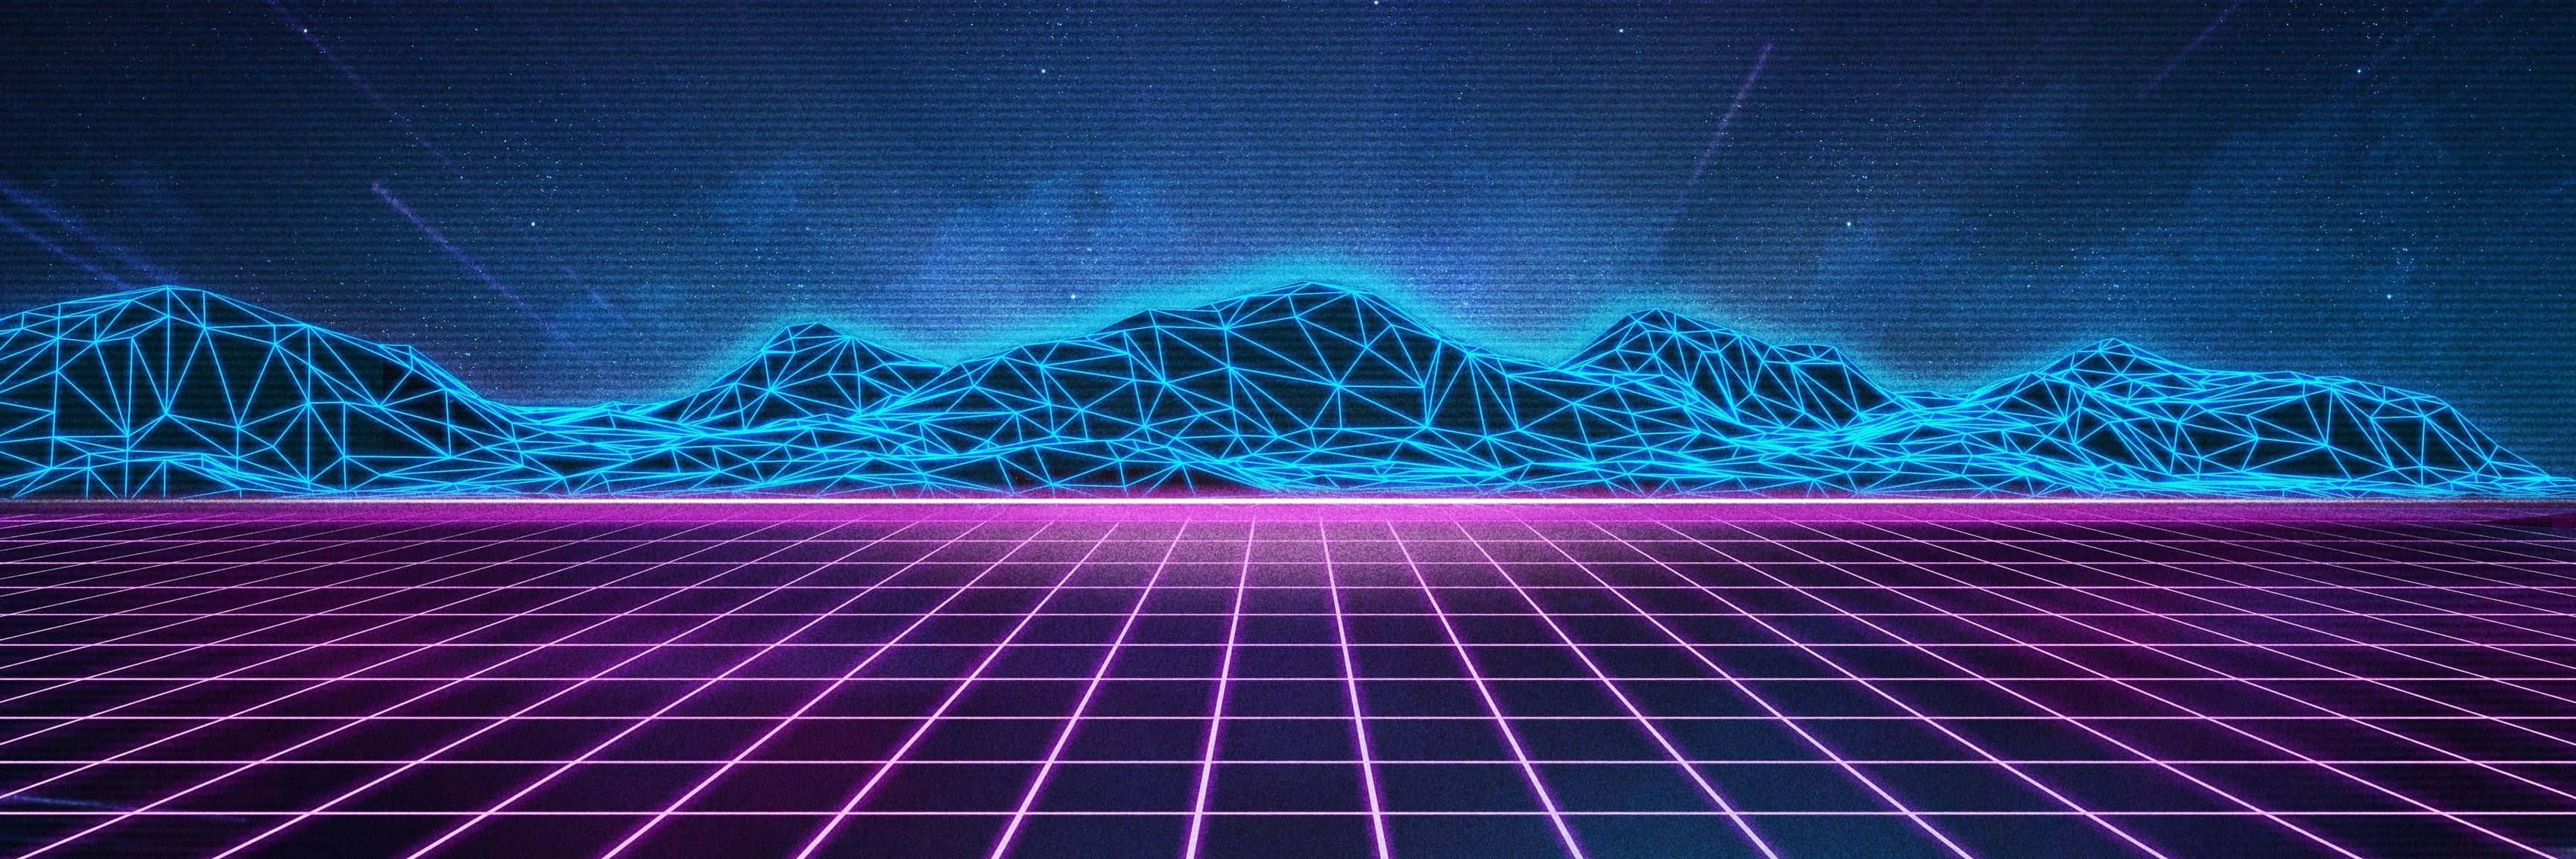 Experience the Radiance of the 1980s Wallpaper